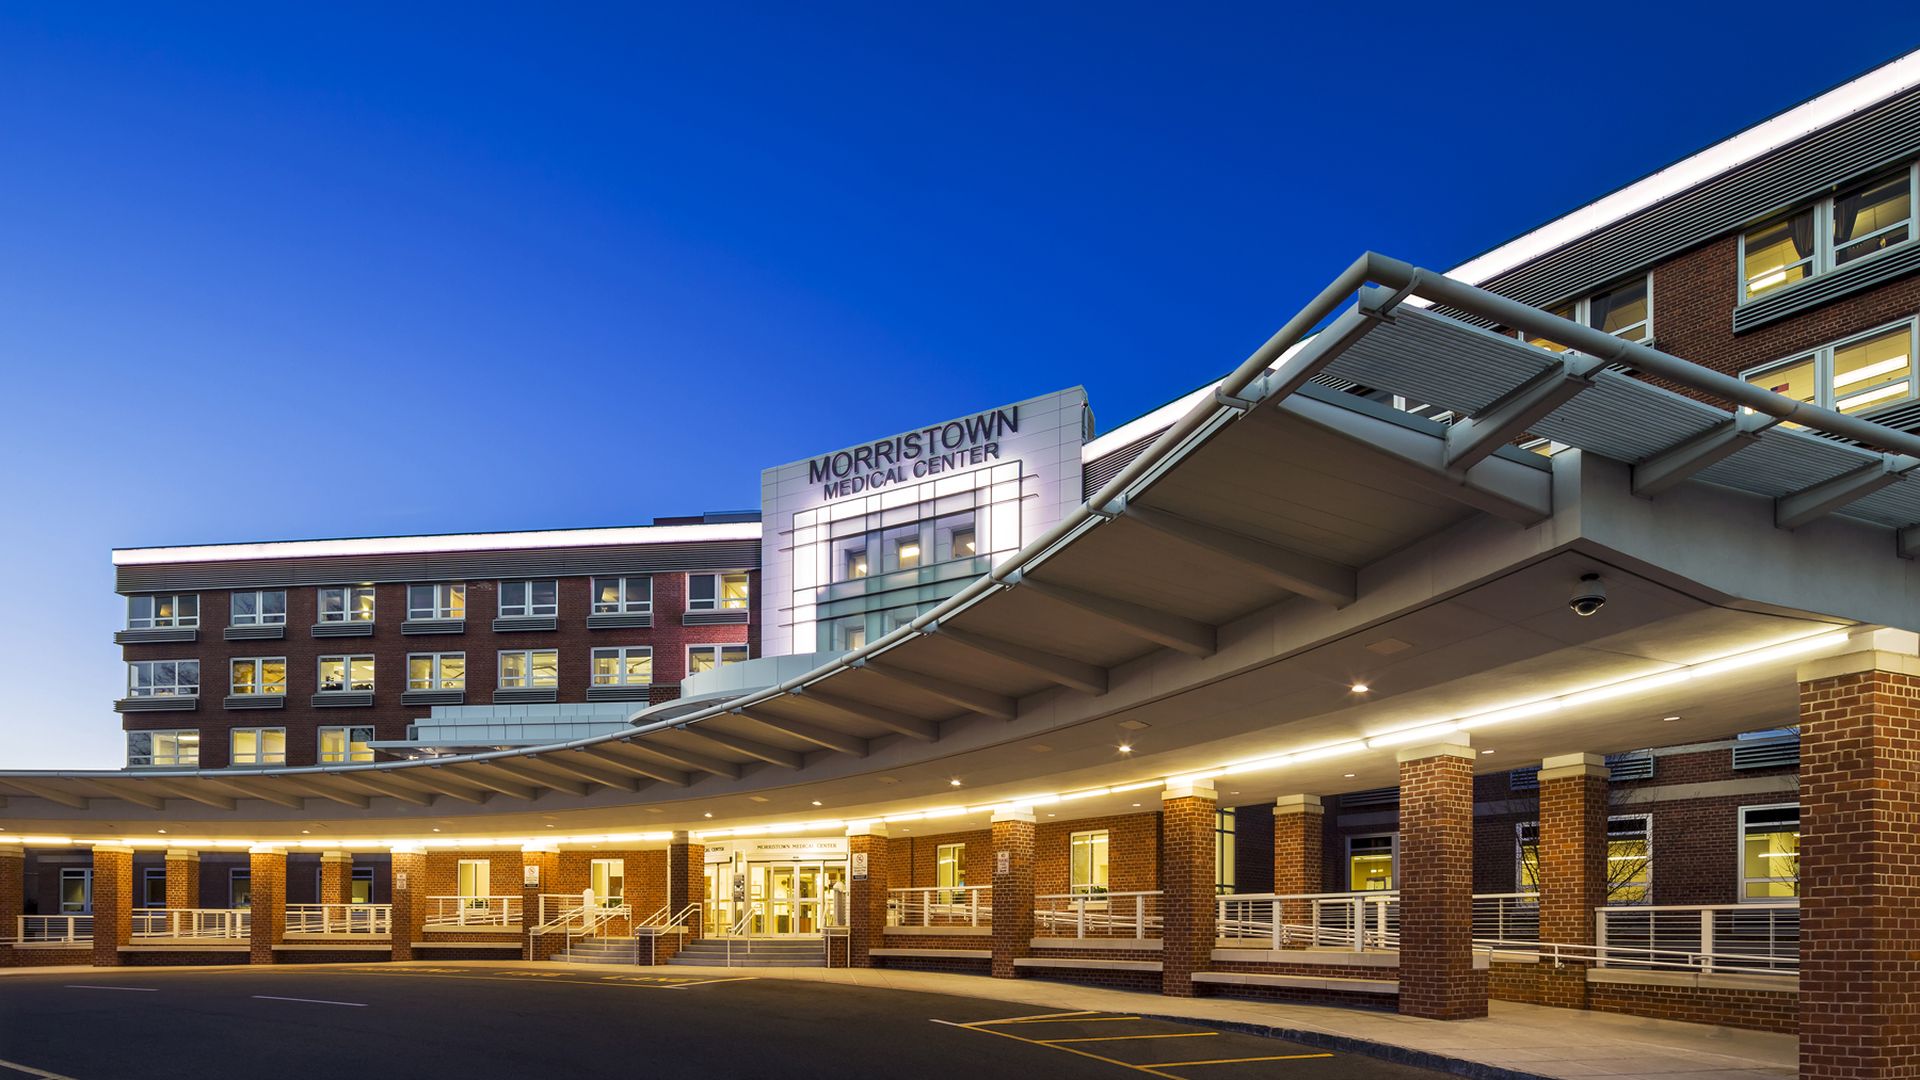 Morristown Medical Center hospital building lit up in the evening.